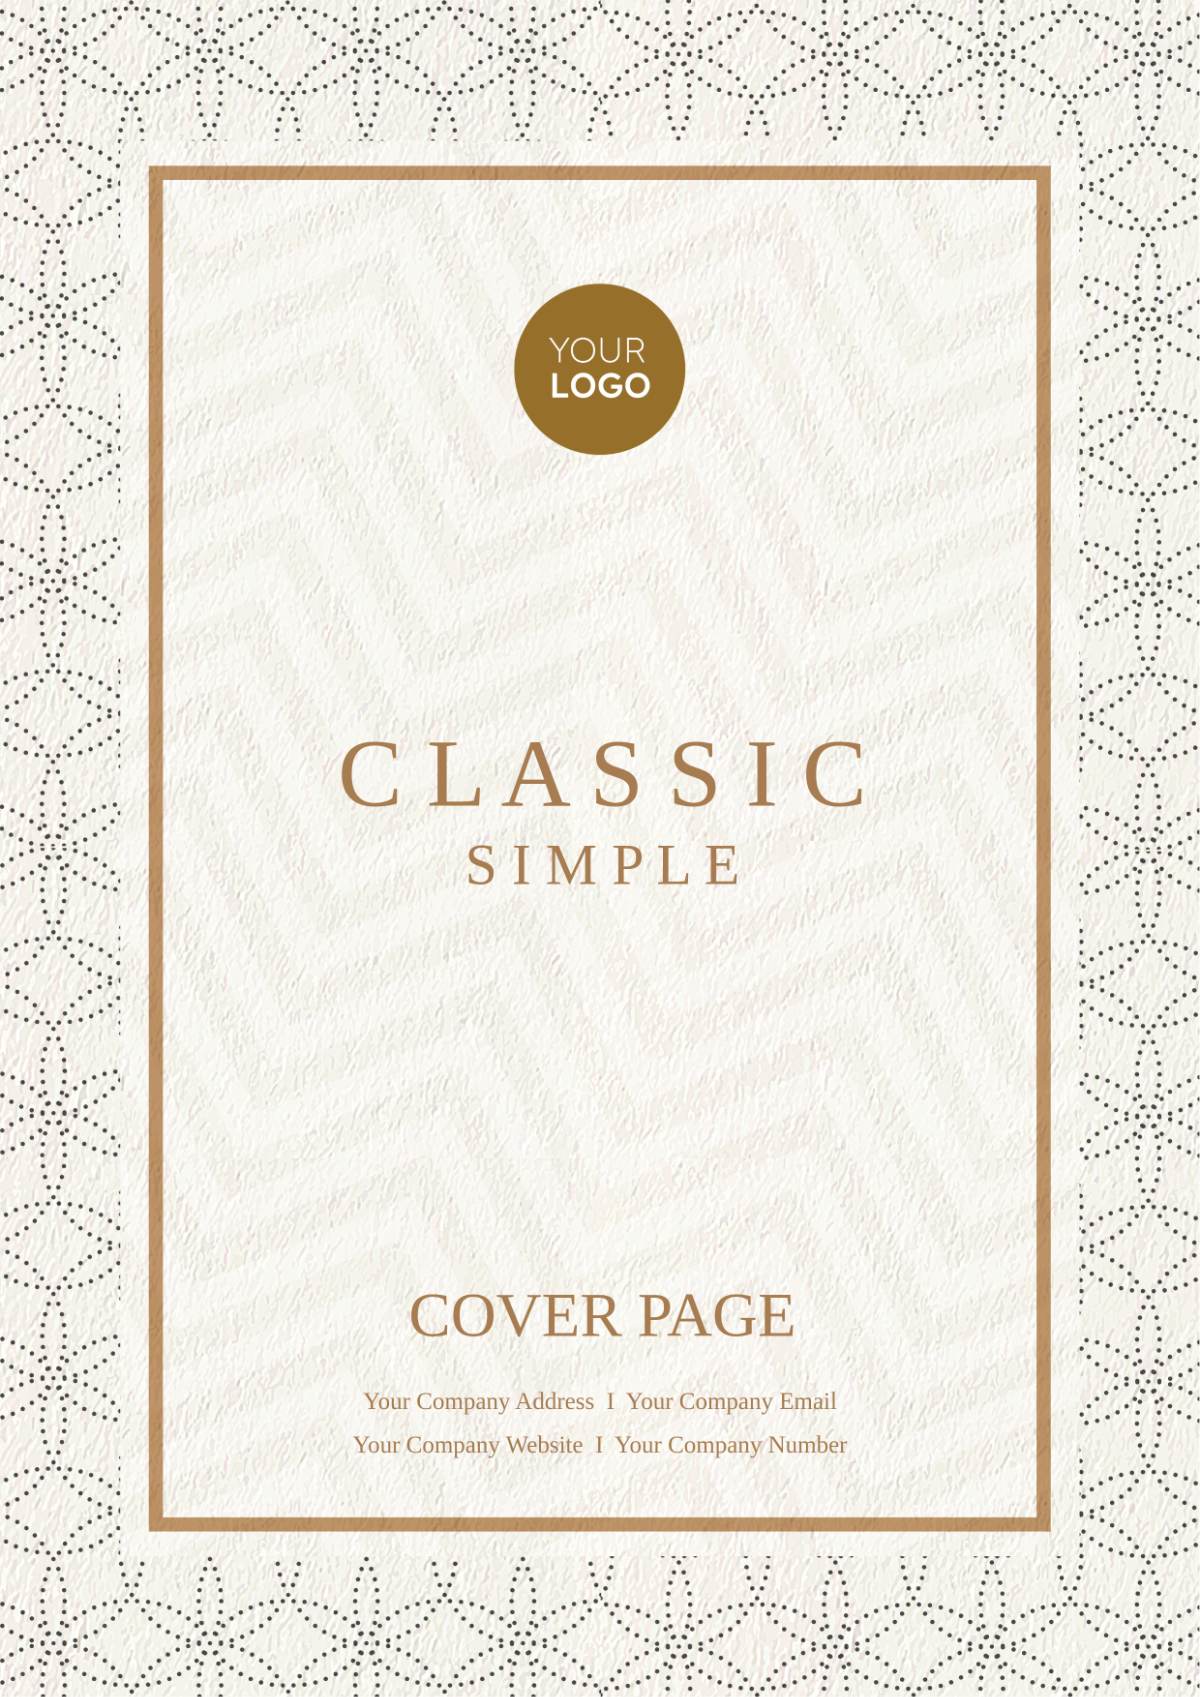 Classic Simple Cover Page